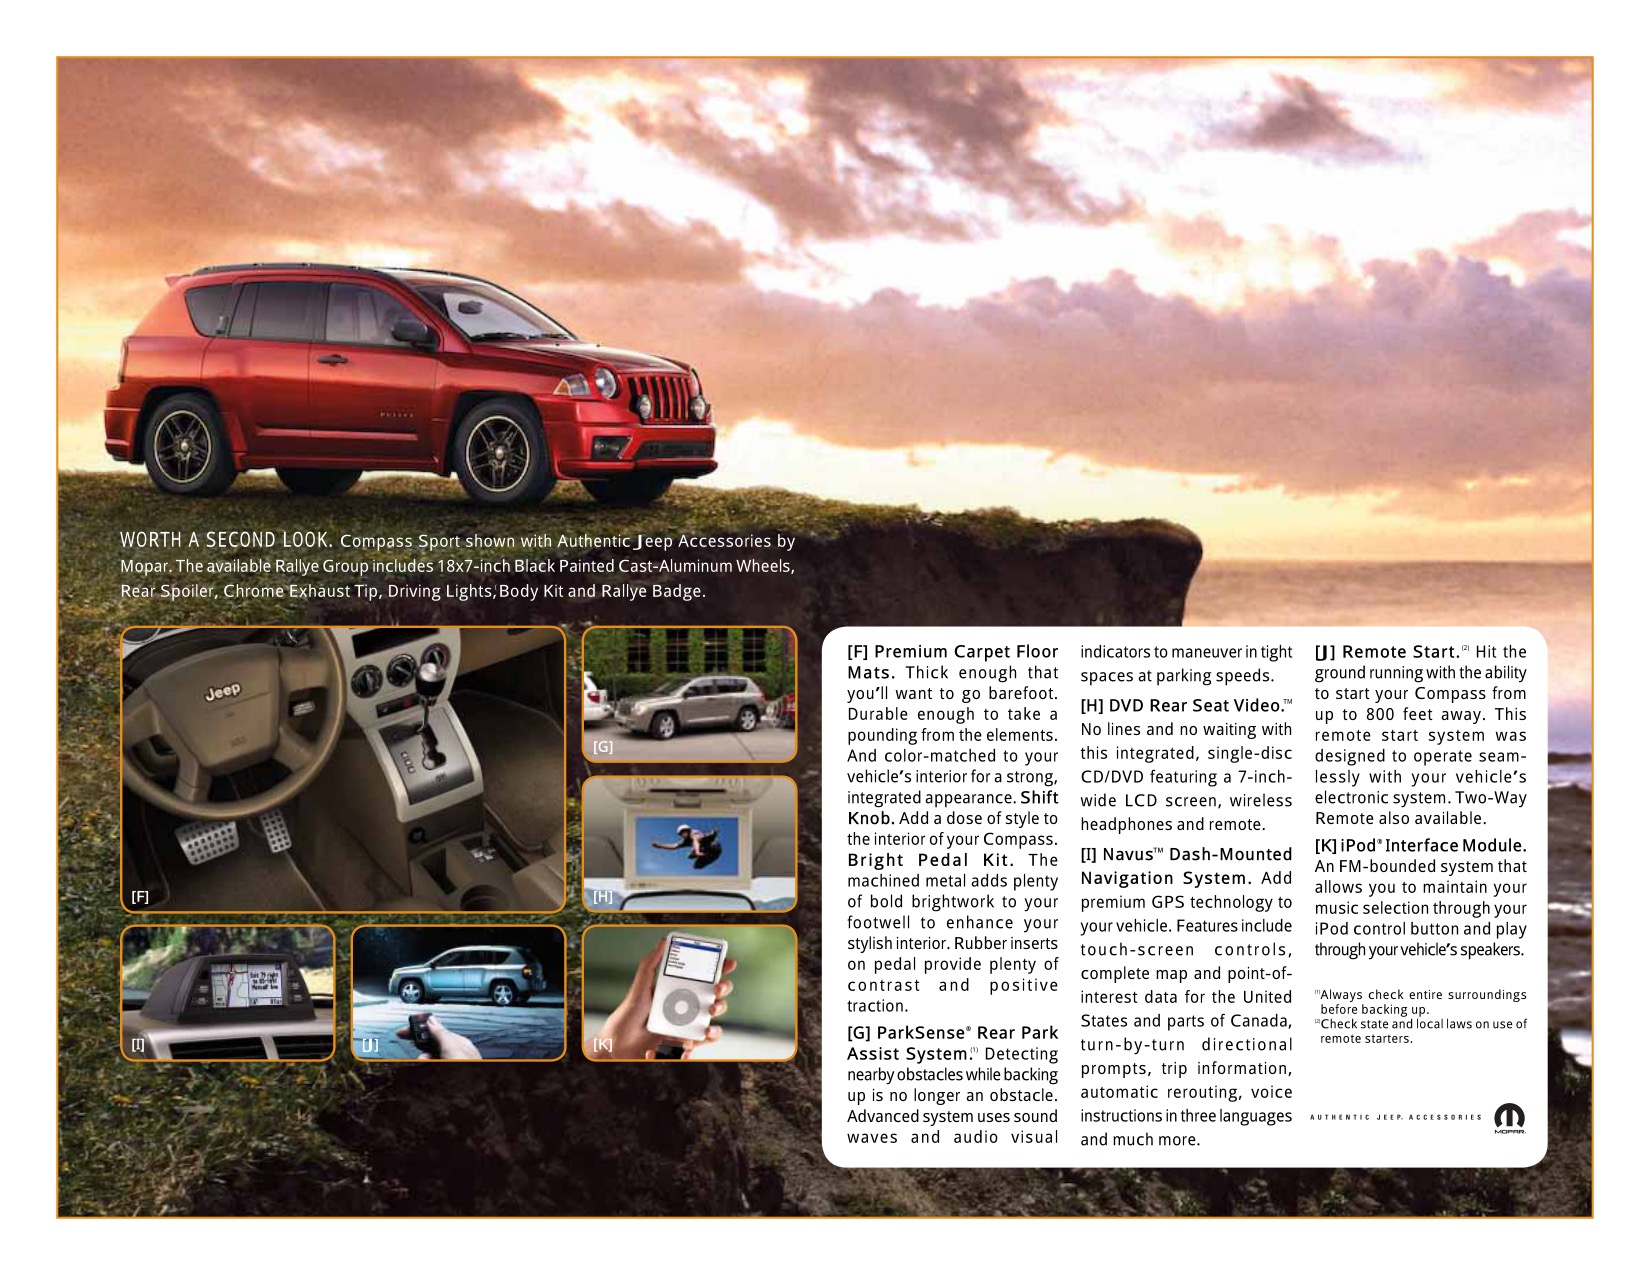 2008 Jeep Compass Brochure Page 17